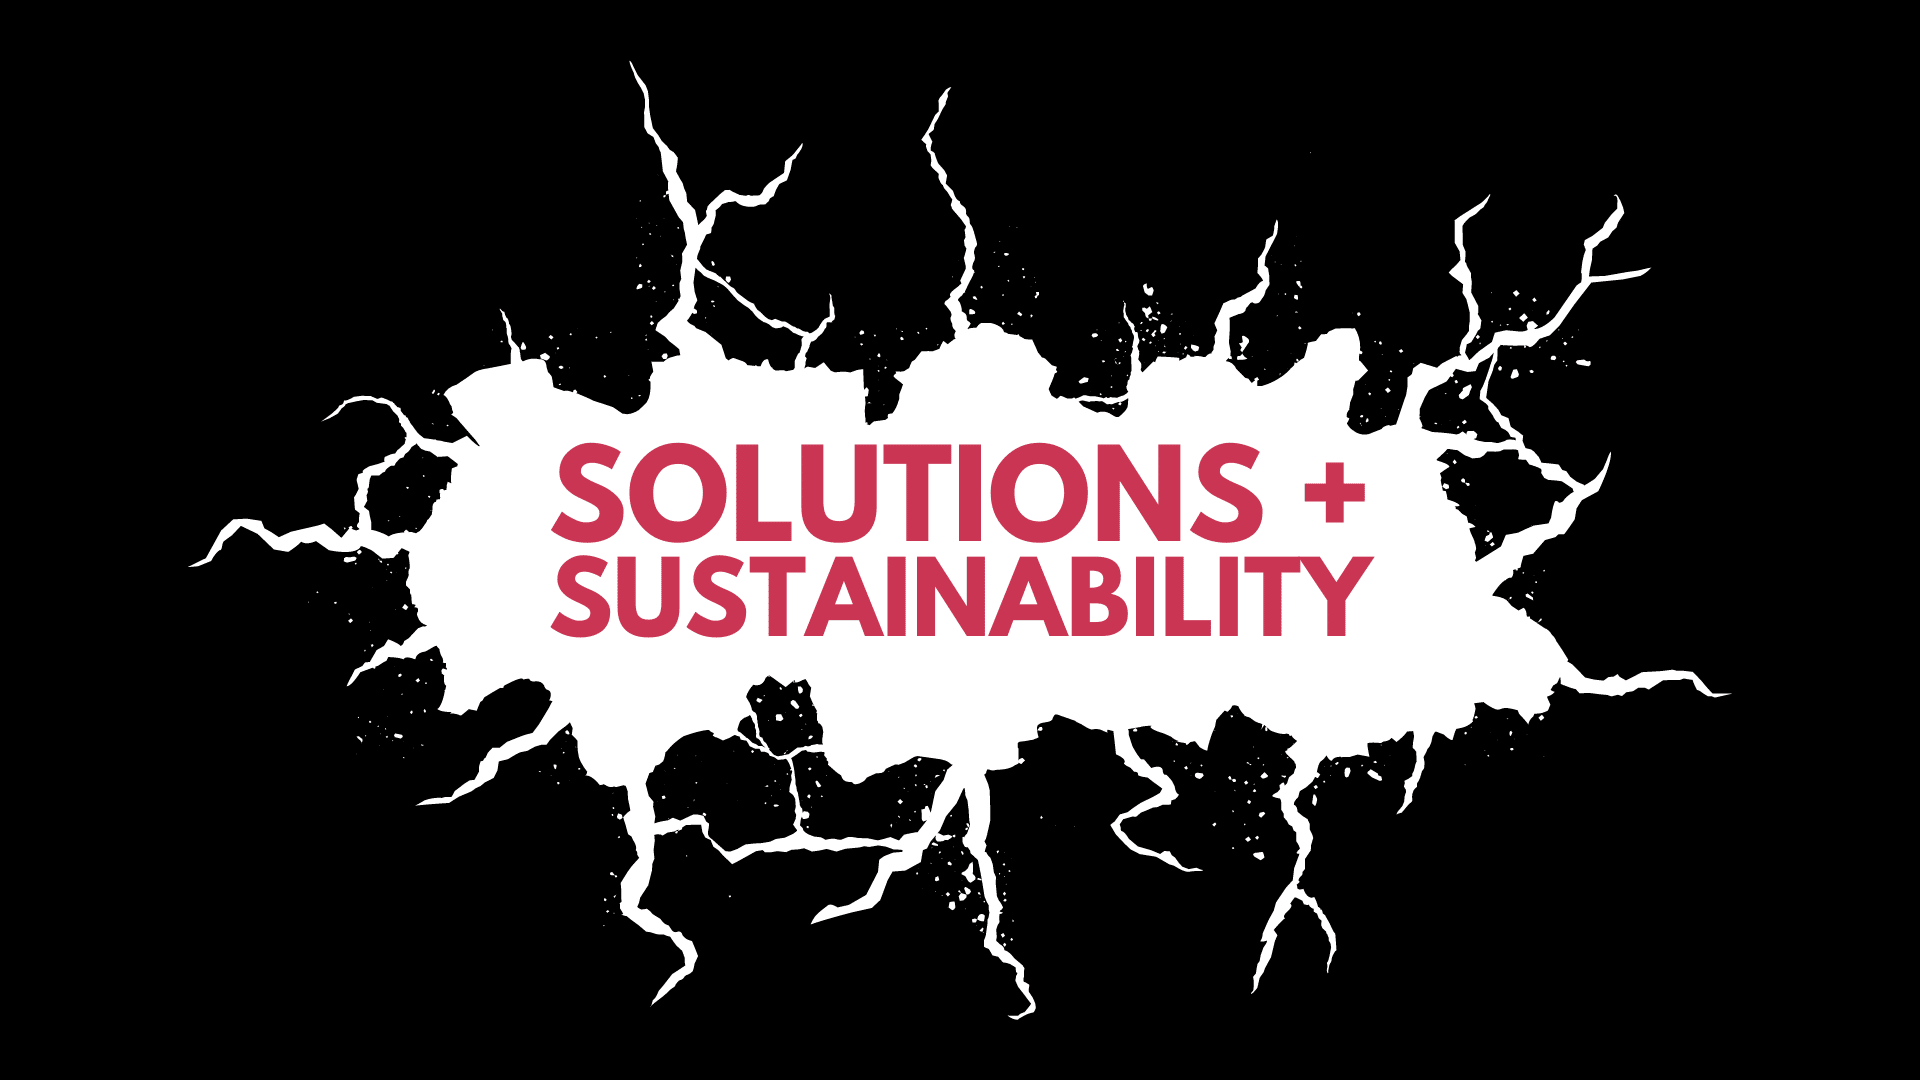 Decoration only: A black background shows white cracks in the middle to reveal red text that reads: "SOLUTIONS + SUSTAINABILITY"